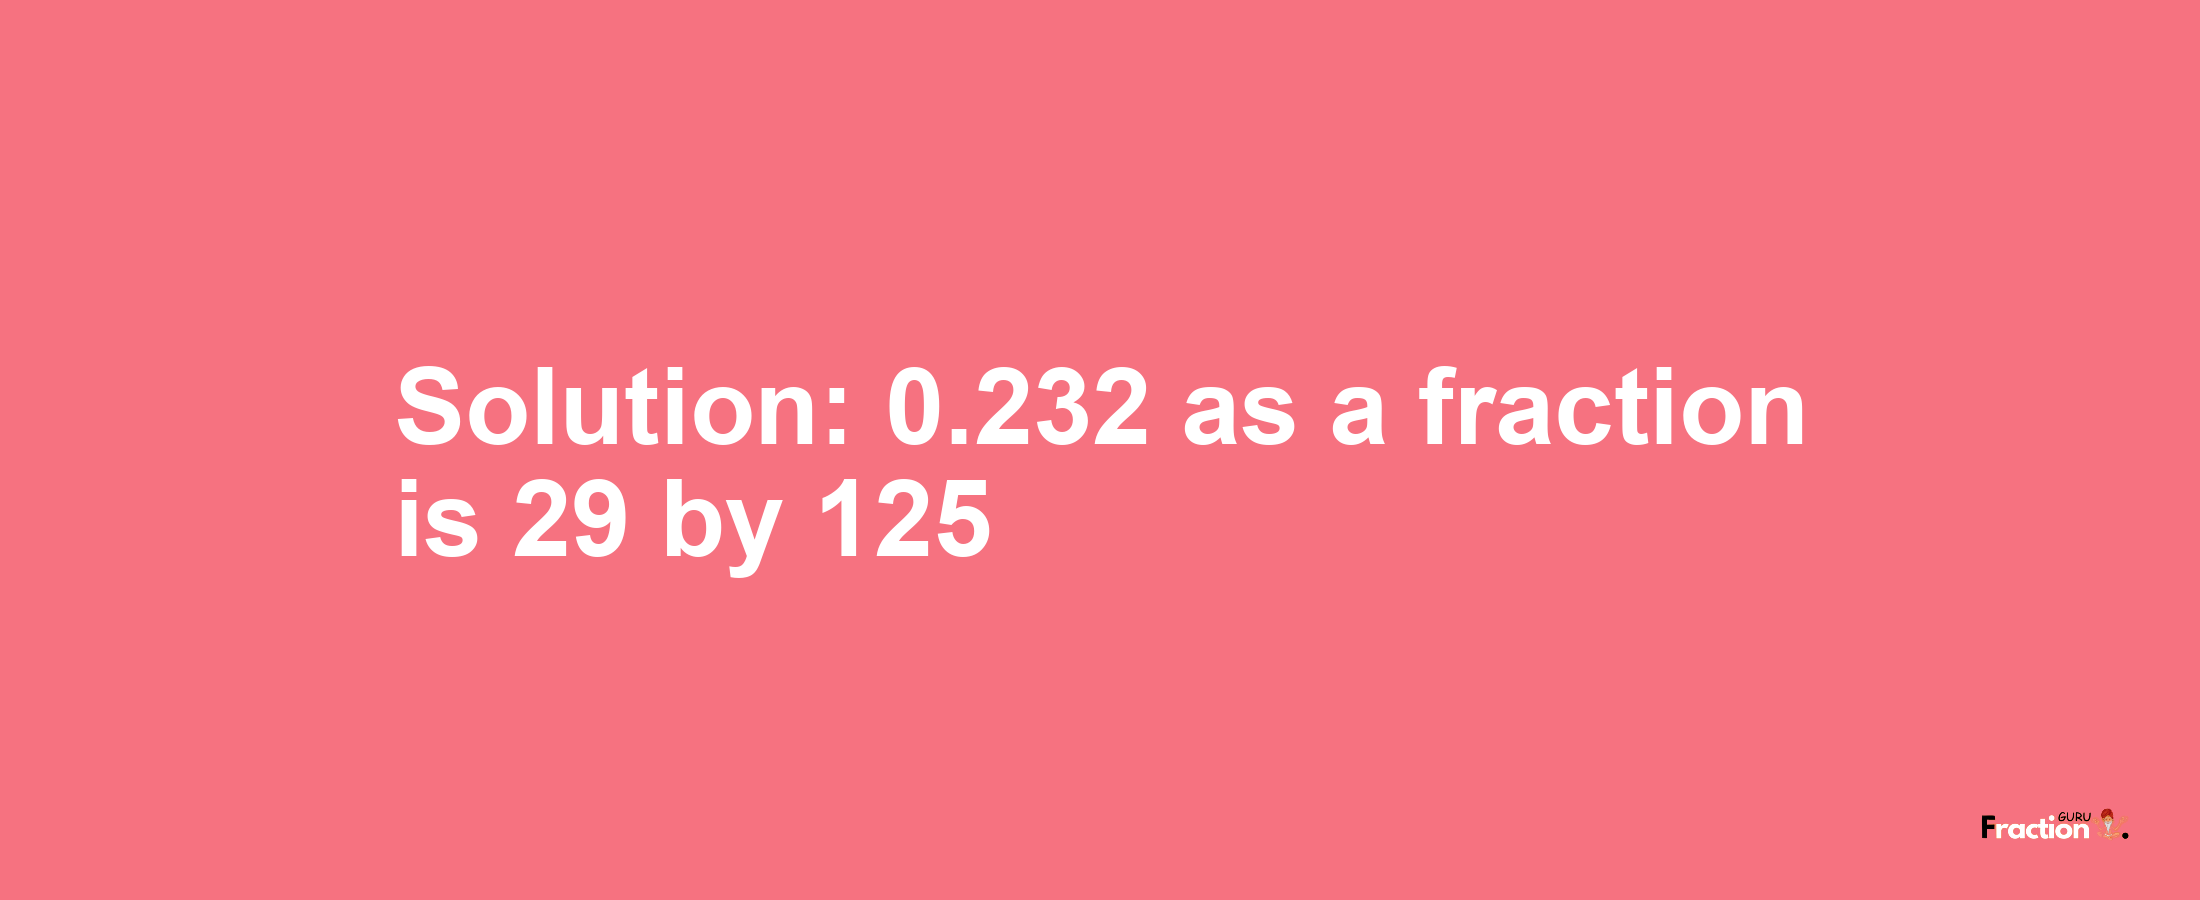 Solution:0.232 as a fraction is 29/125